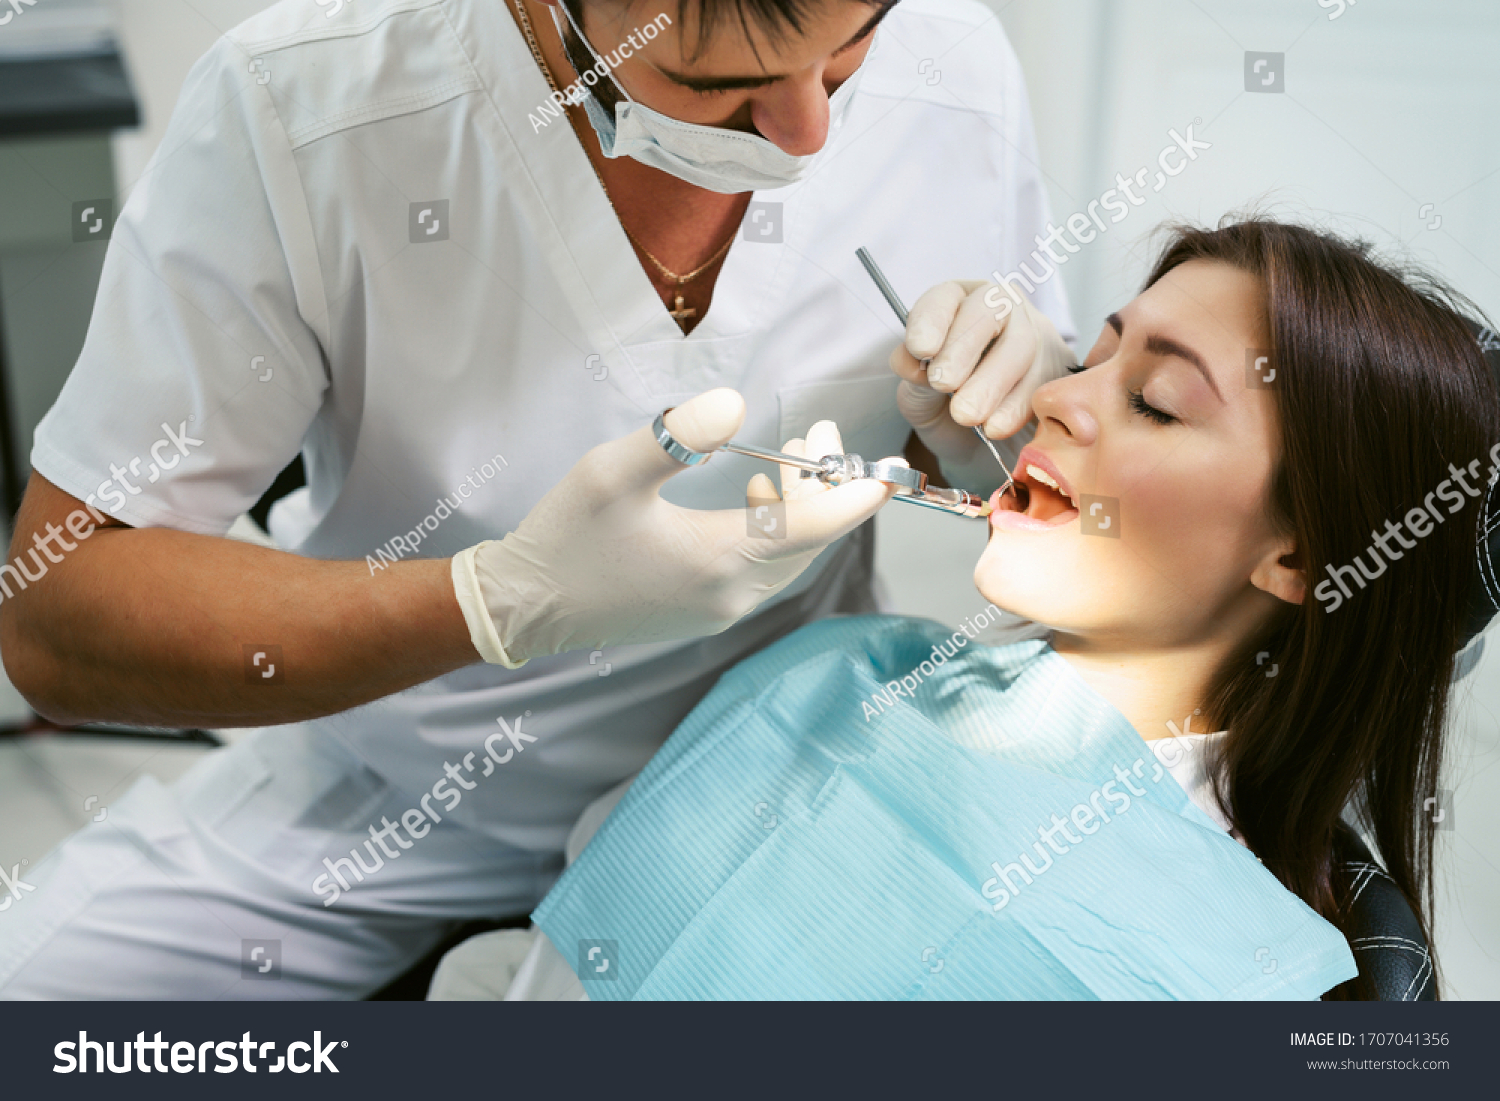 Painkiller anesthesia injection. Dentist examining a patient's teeth in modern dentistry office. Closeup cropped picture with copyspace. Doctor in disposable medical facial mask. #1707041356